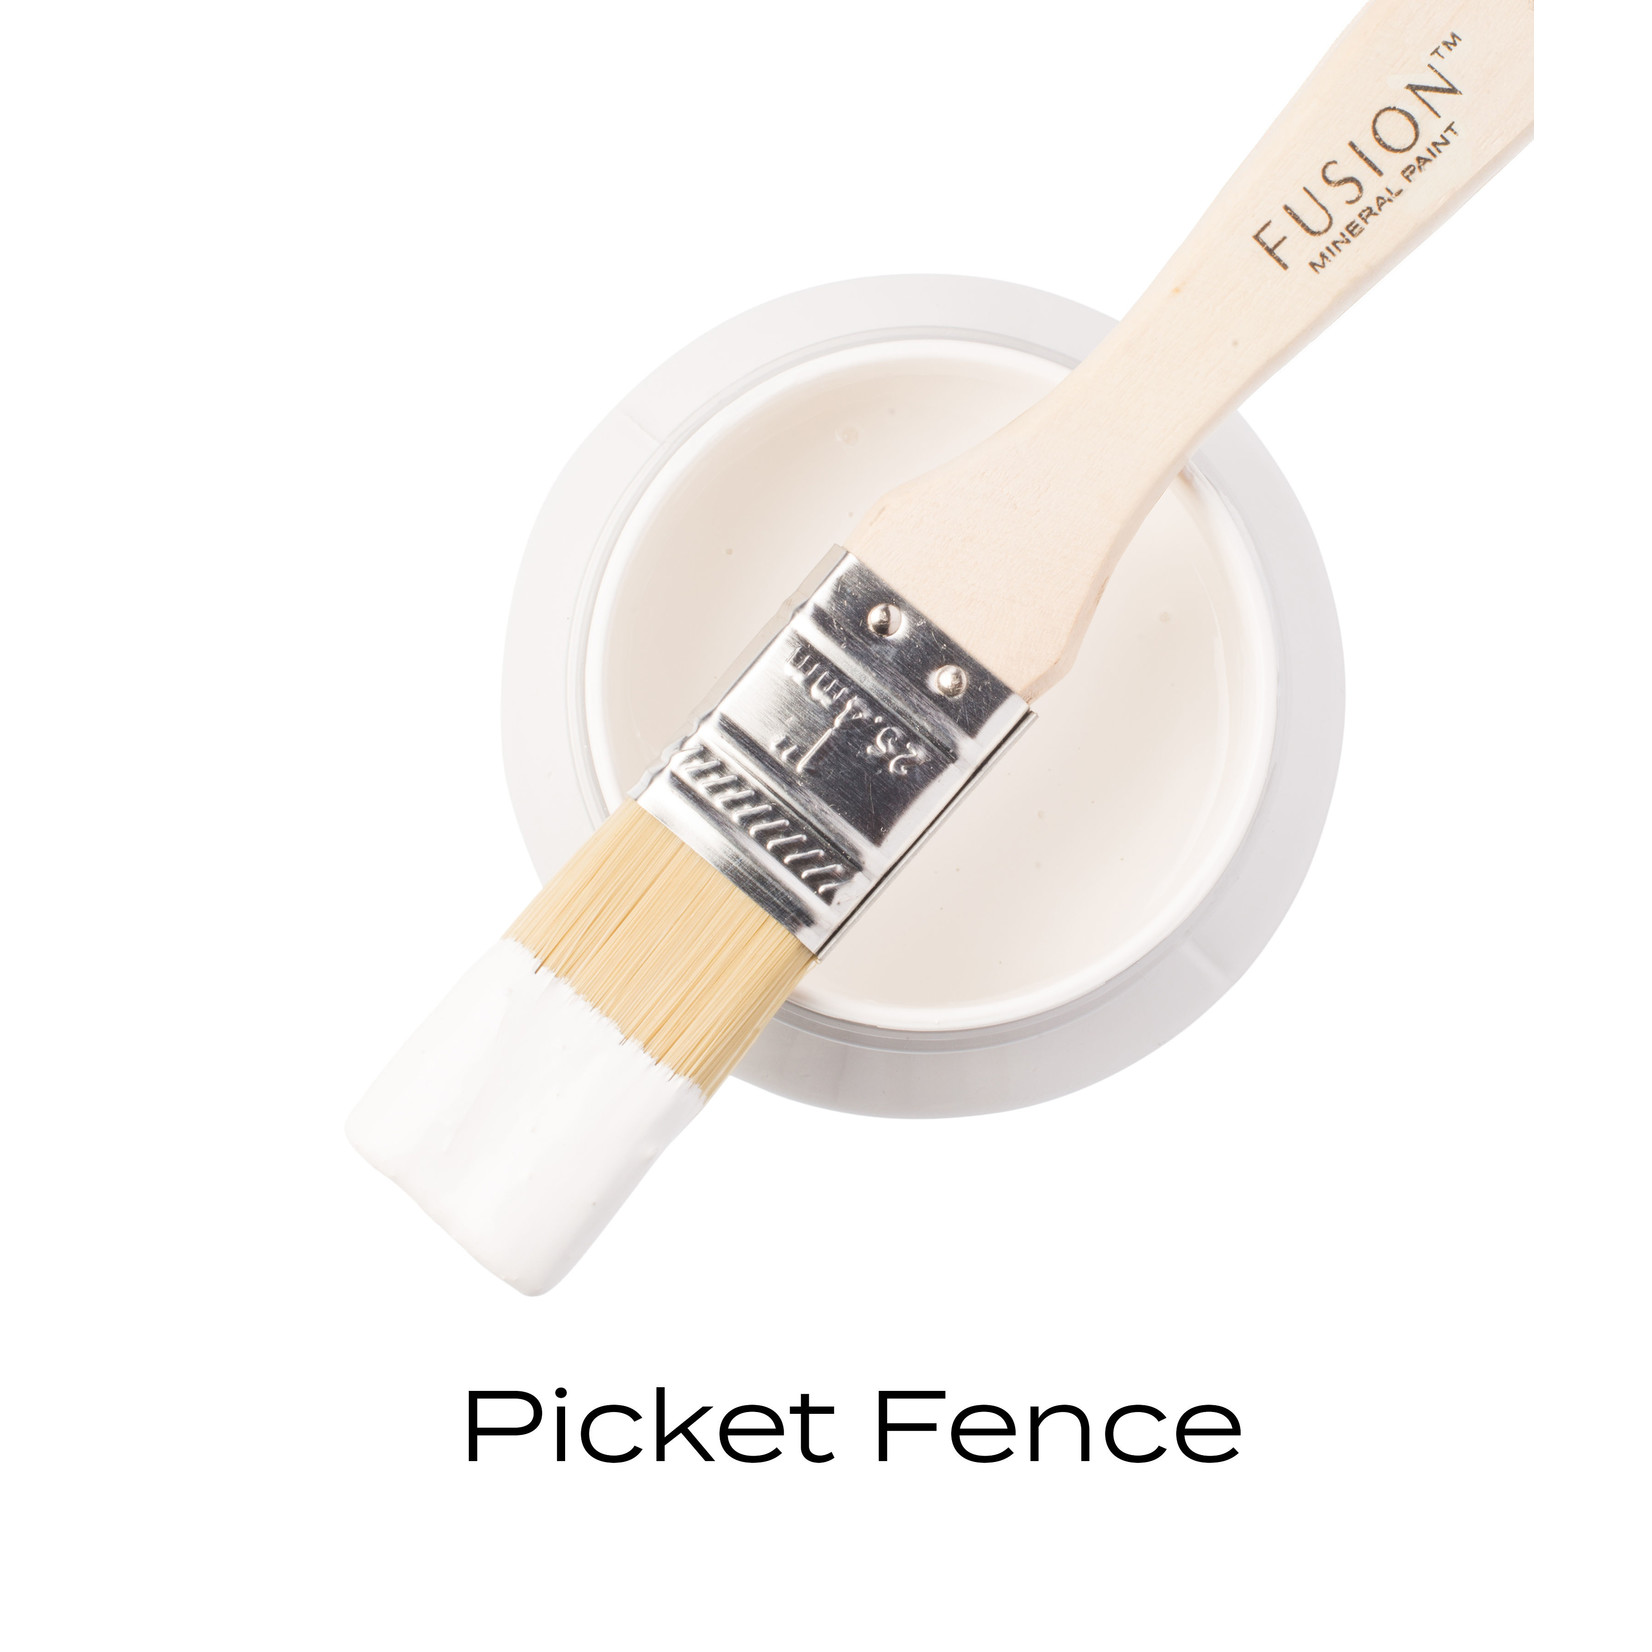 Fusion Mineral Paint™ - Picket Fence